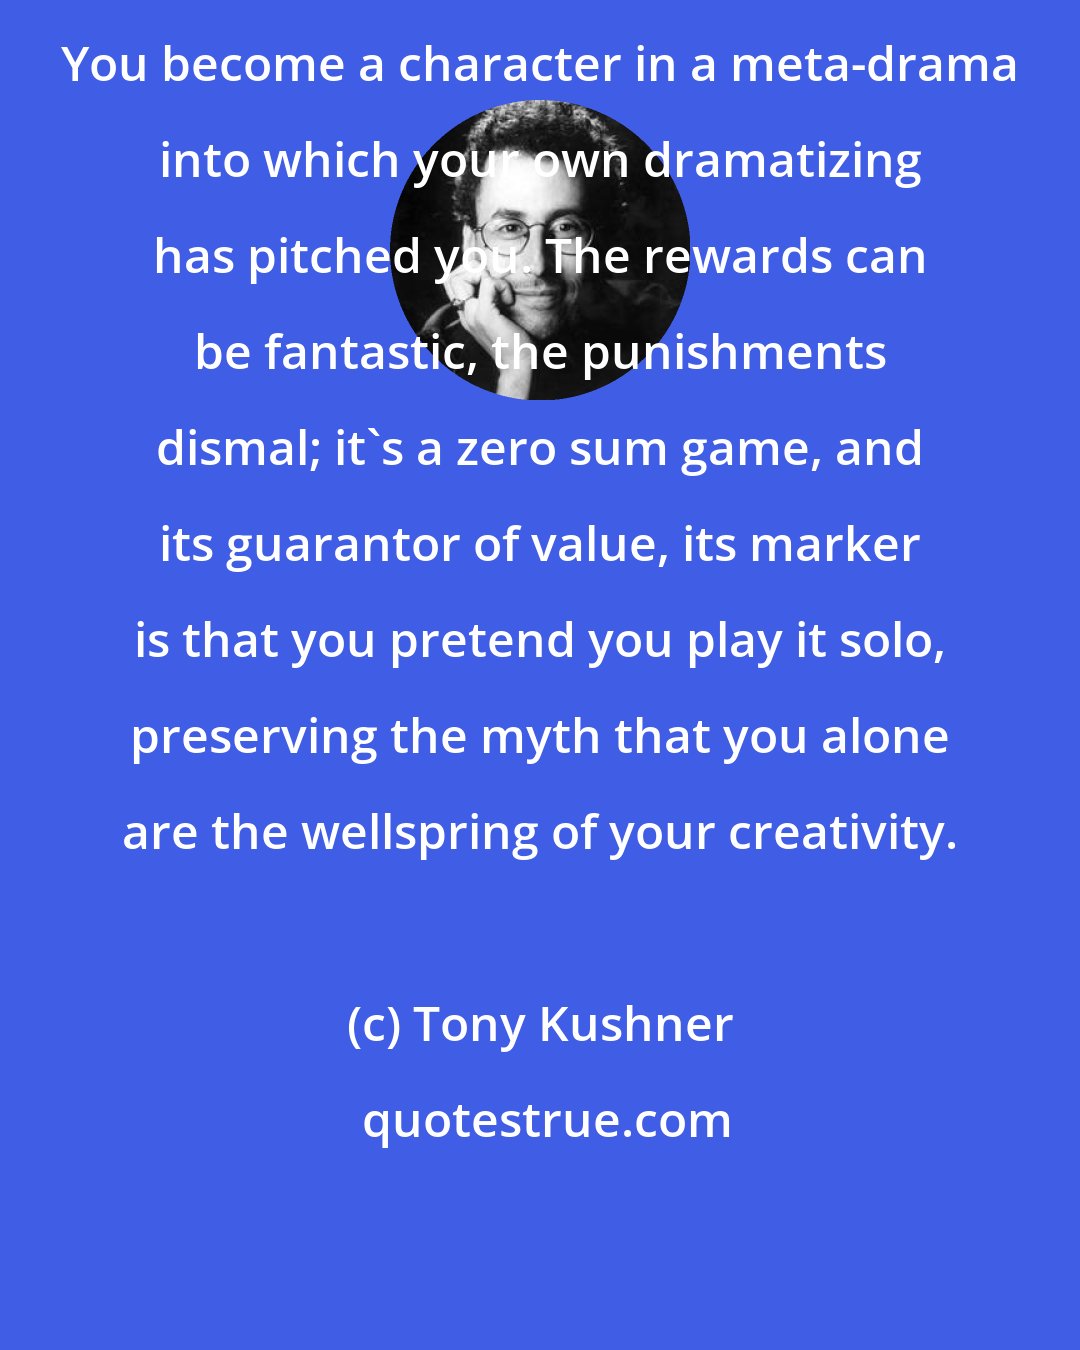 Tony Kushner: You become a character in a meta-drama into which your own dramatizing has pitched you. The rewards can be fantastic, the punishments dismal; it's a zero sum game, and its guarantor of value, its marker is that you pretend you play it solo, preserving the myth that you alone are the wellspring of your creativity.